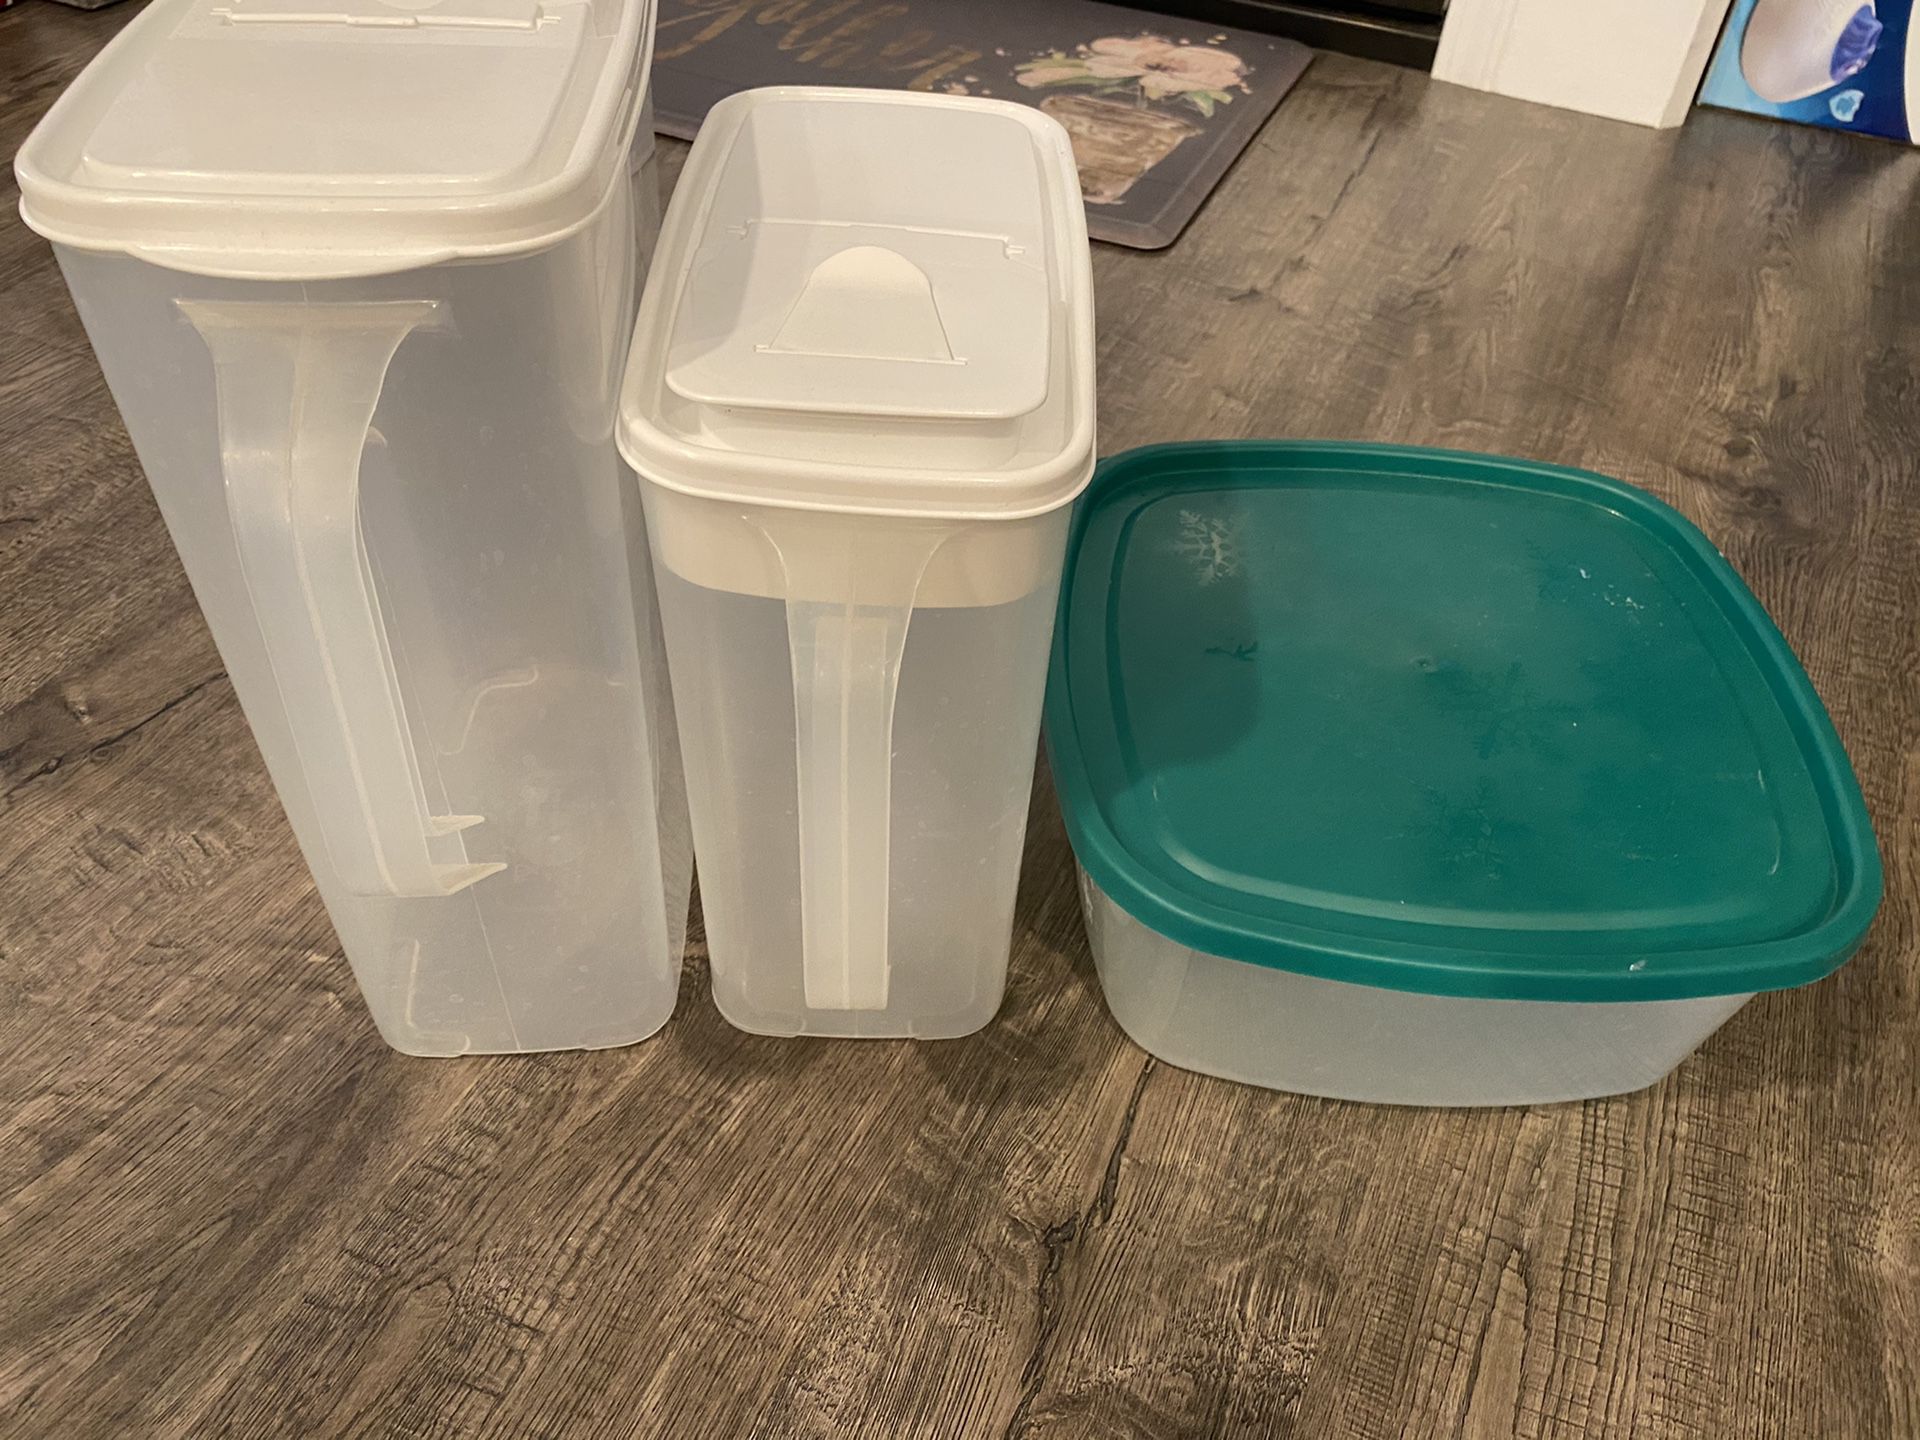 Kitchen/pantry storage containers